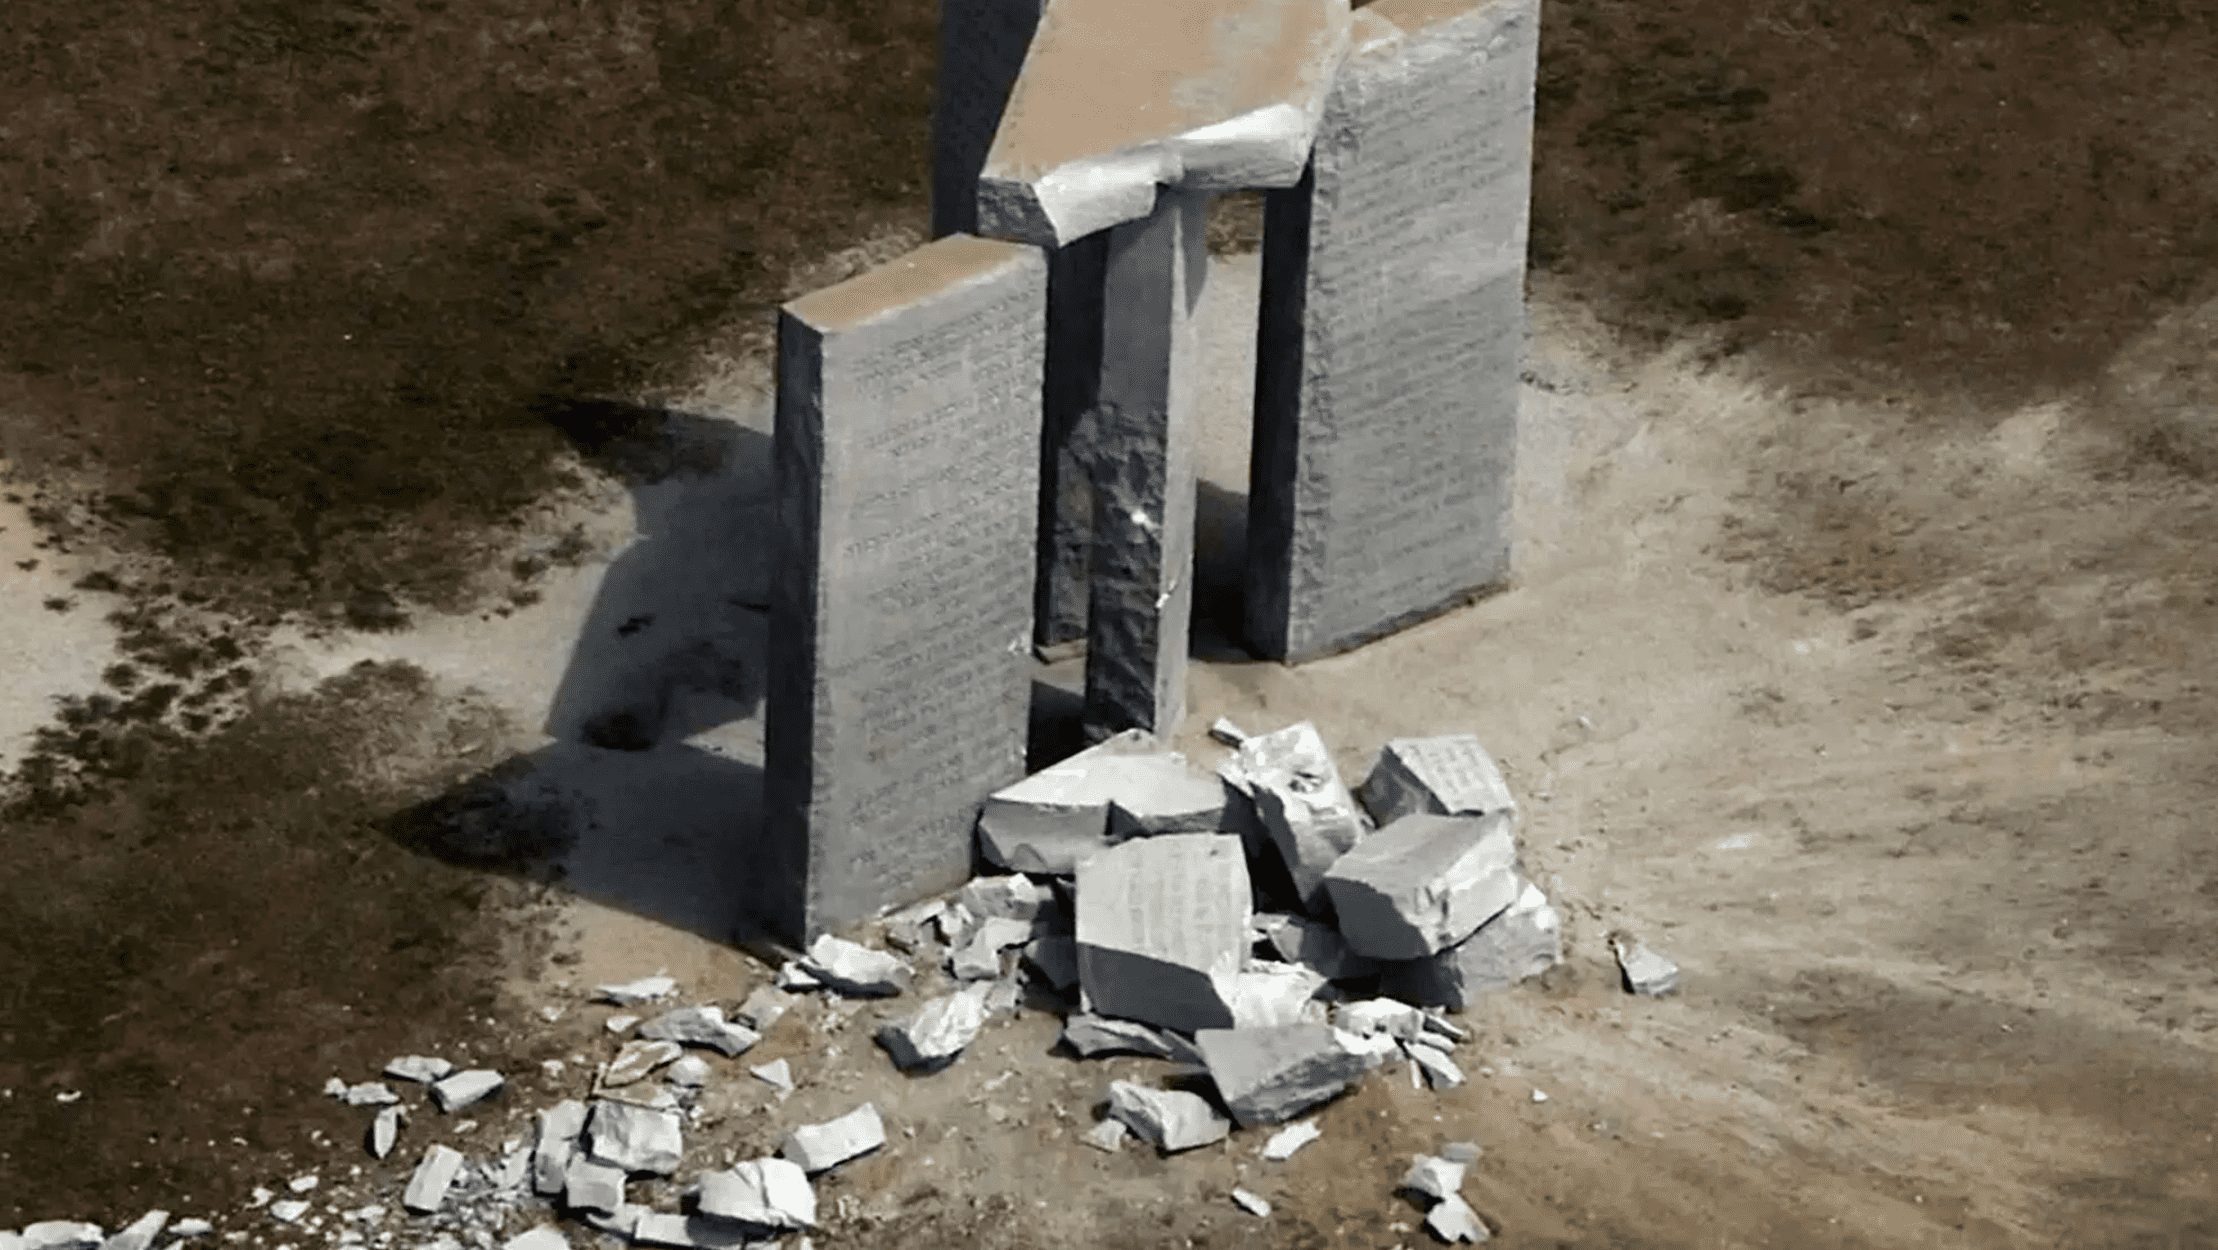 Georgia Guidestones Mysteriously Blown Up